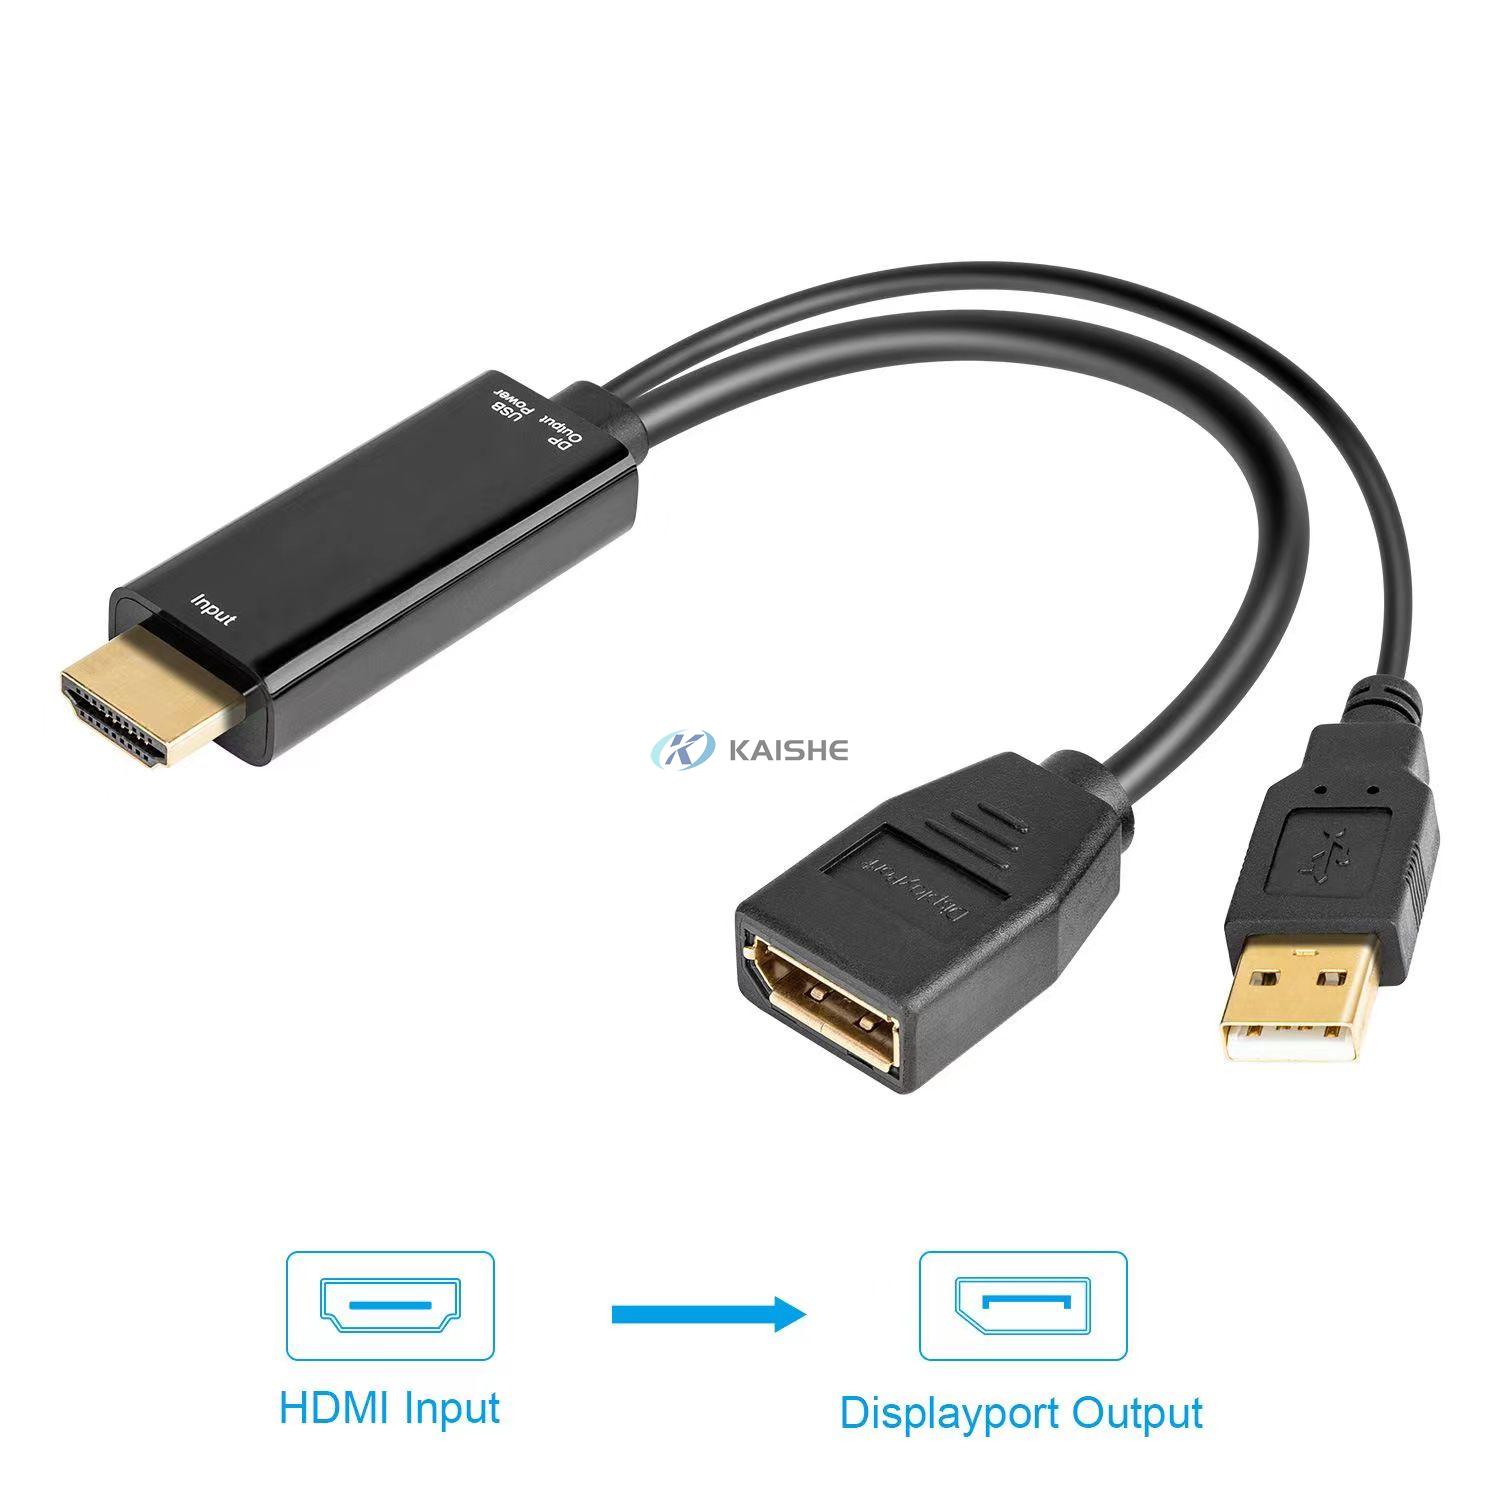 HDMI to DisplayPort Adapter 4K60Hz HDMI 2.0 Male to DisplayPort 1.2 Female Converter, 144Hz, 120Hz, HDMI Output to DP Input Adapter for Monitor, Xbox One, PS4/5, Mac Mini